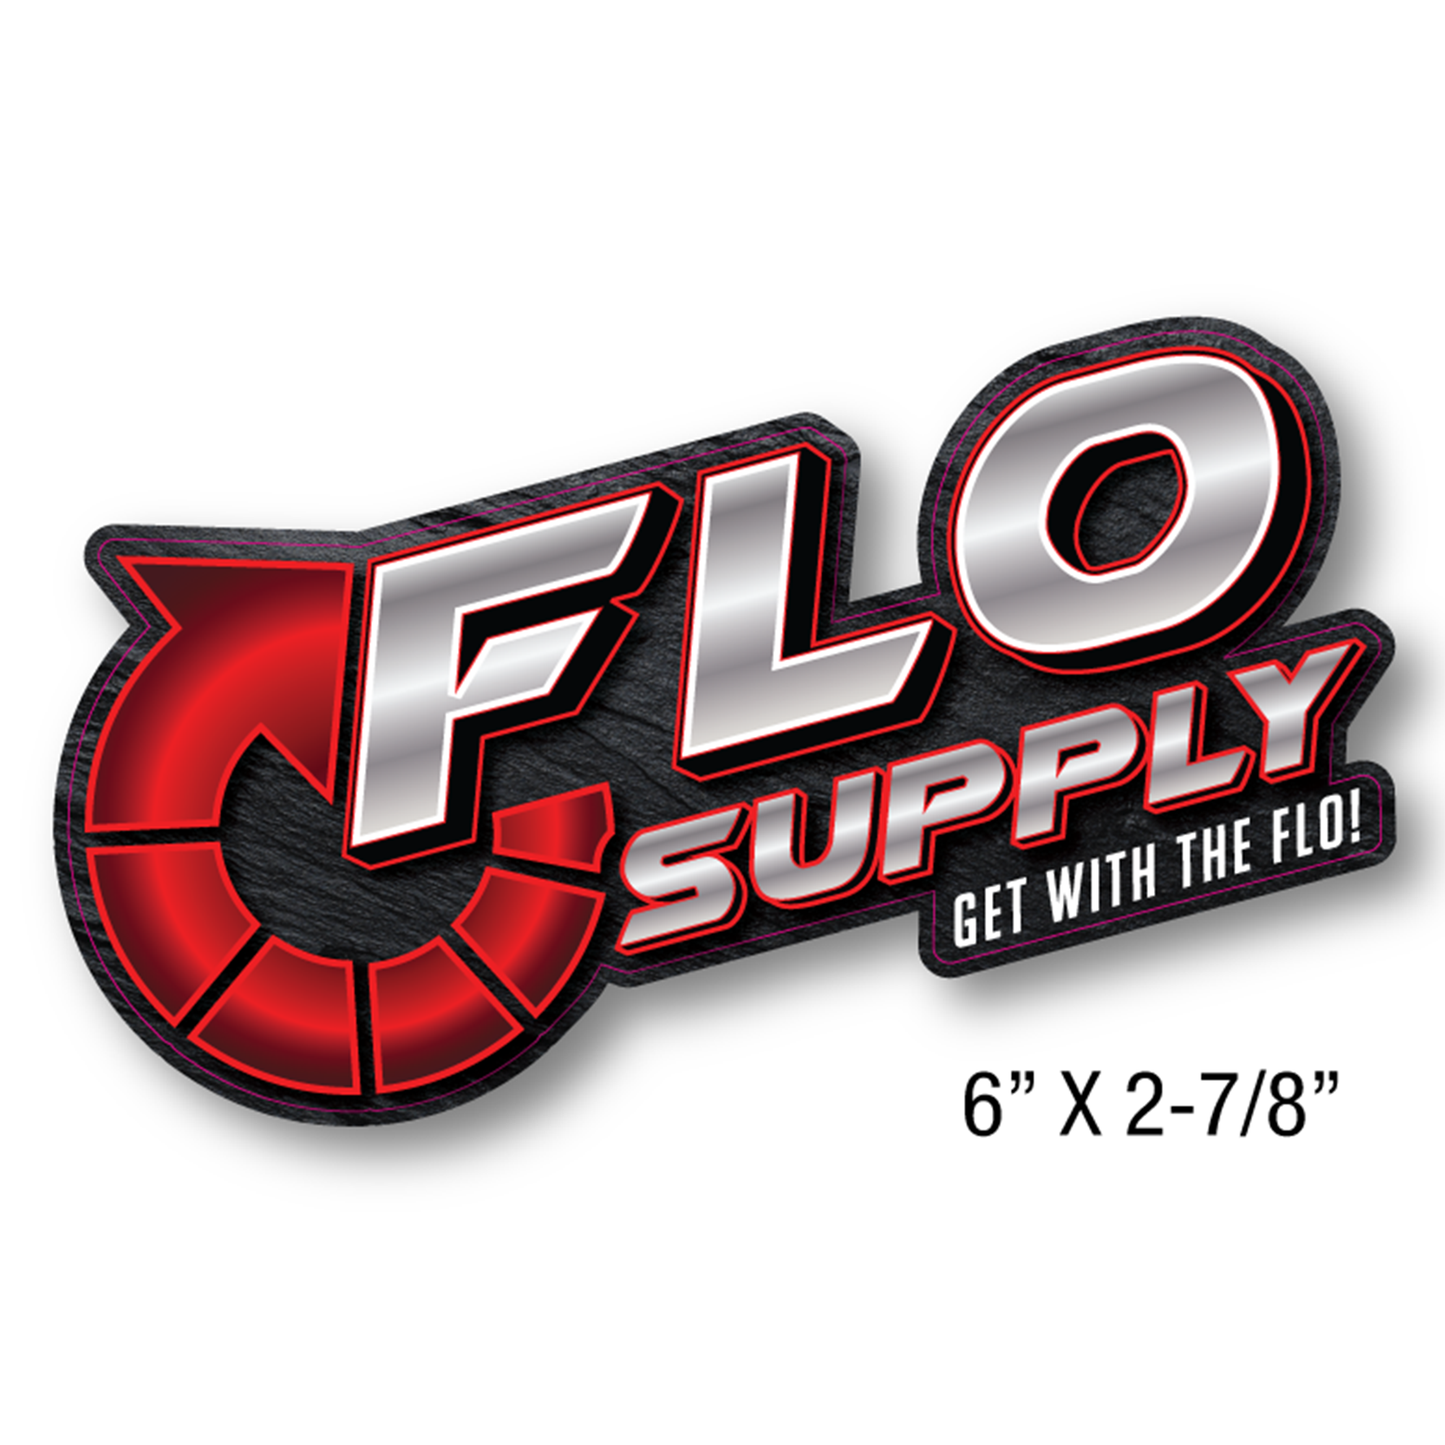 Flo Supply Promotional Decal - Contour Cut (6" x 2-7/8")